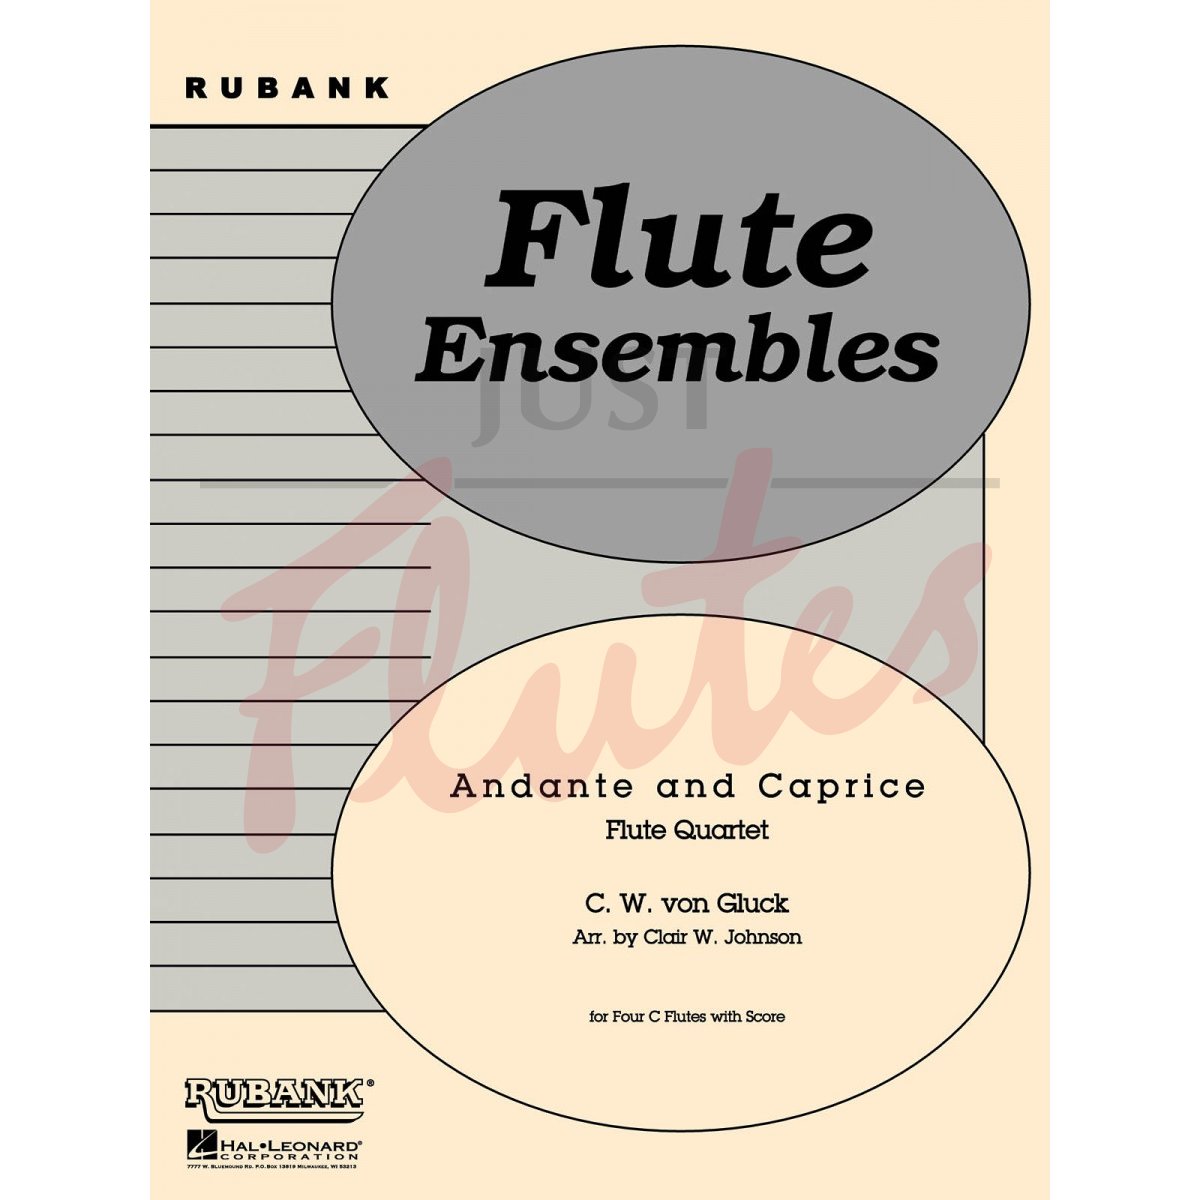 Andante and Caprice [4 Flutes]